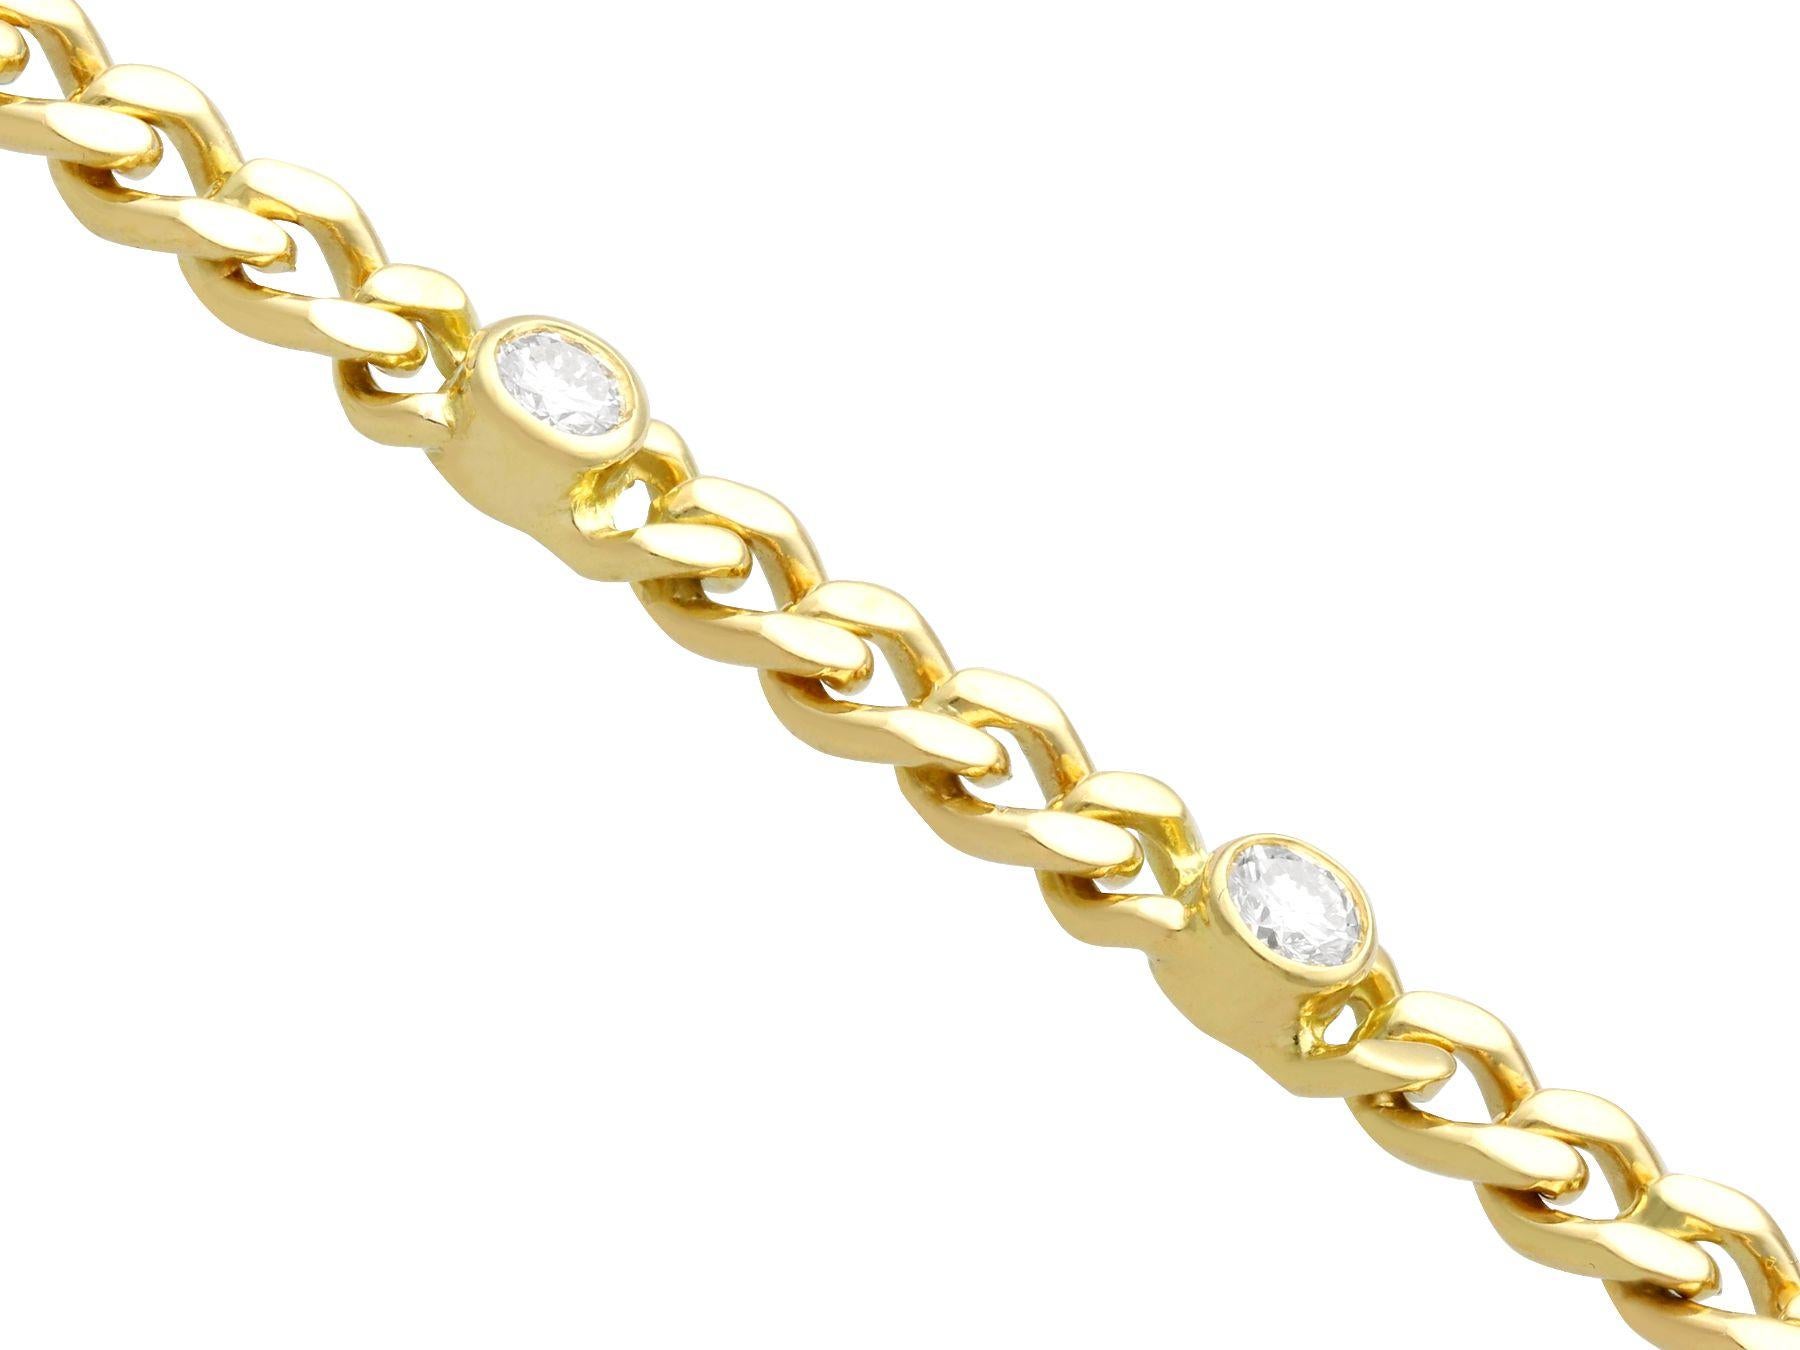 Vintage 1.10 Carat Diamond and 18K Yellow Gold Bracelet Circa 1990 In Excellent Condition For Sale In Jesmond, Newcastle Upon Tyne